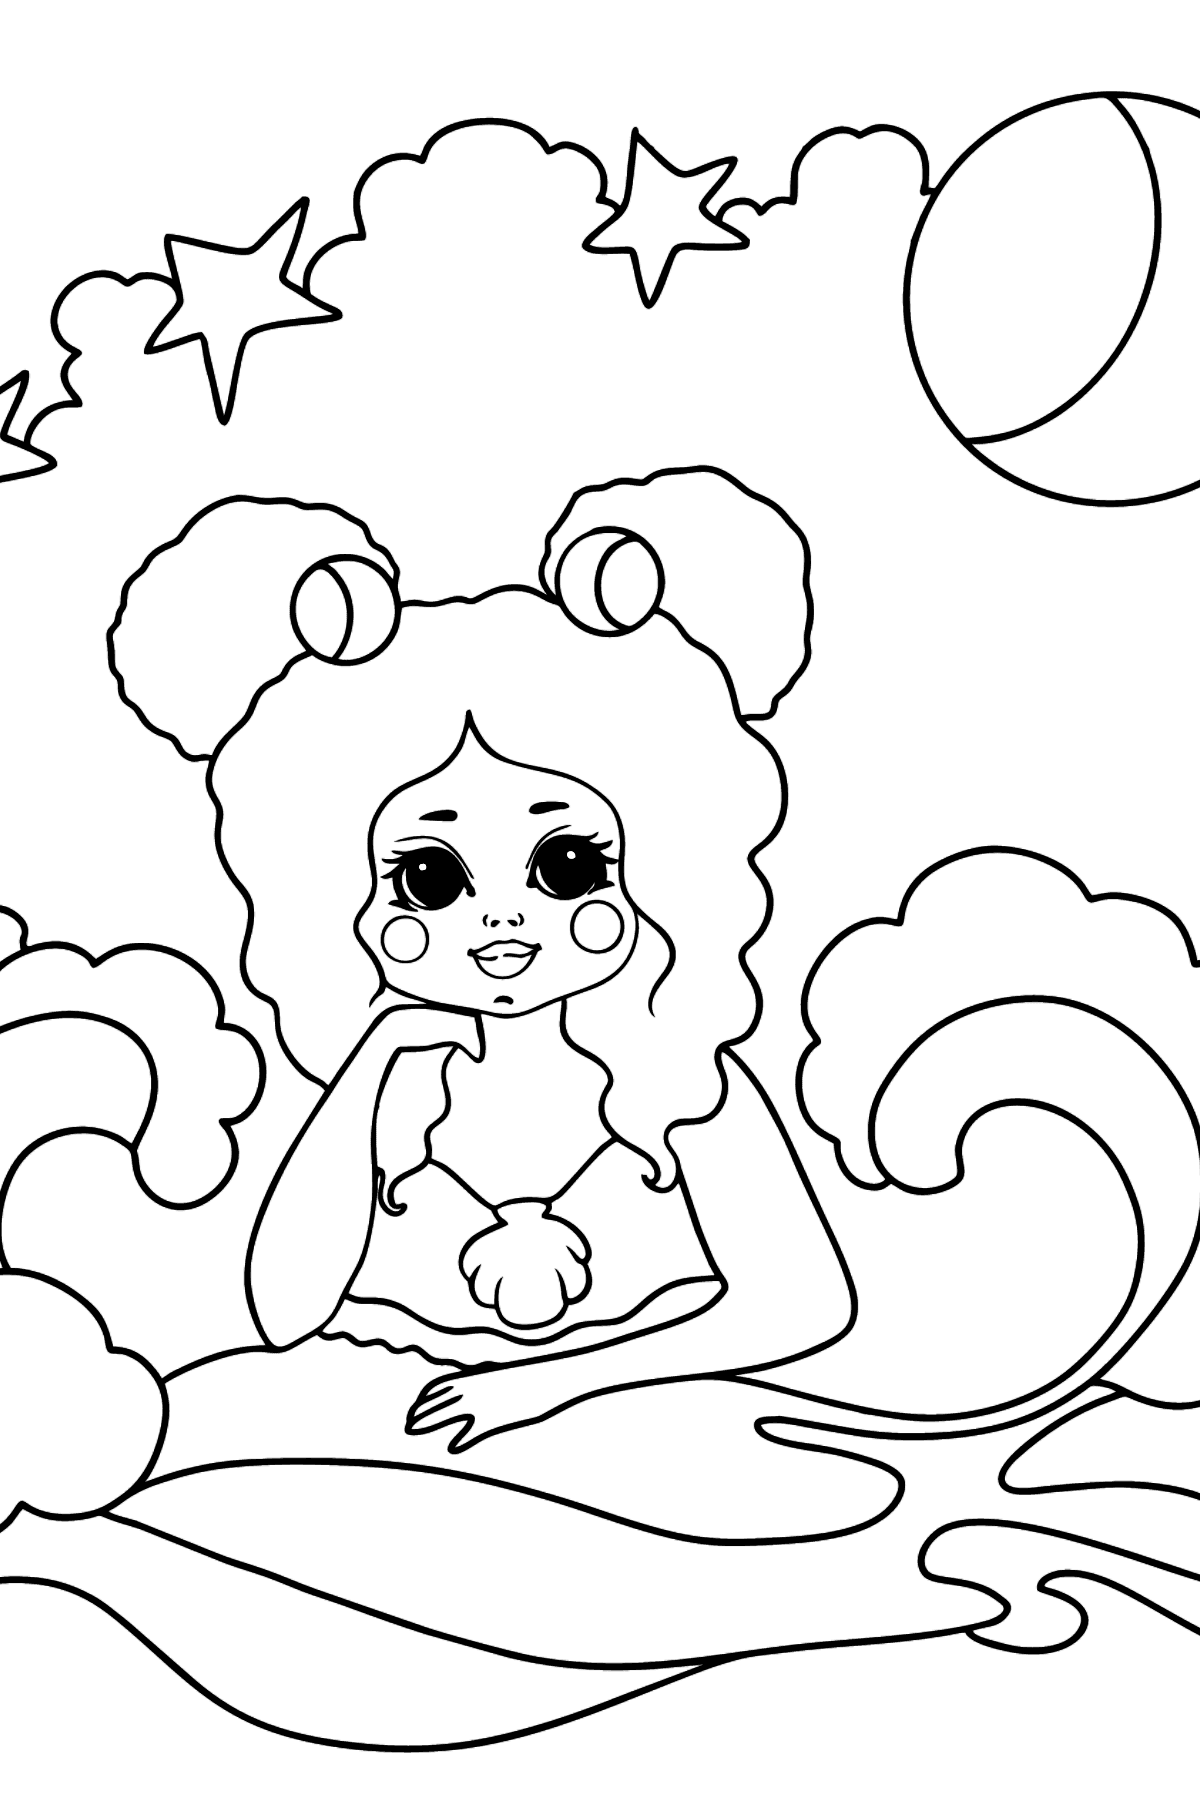 Mermaid and Moon coloring page - Coloring Pages for Kids